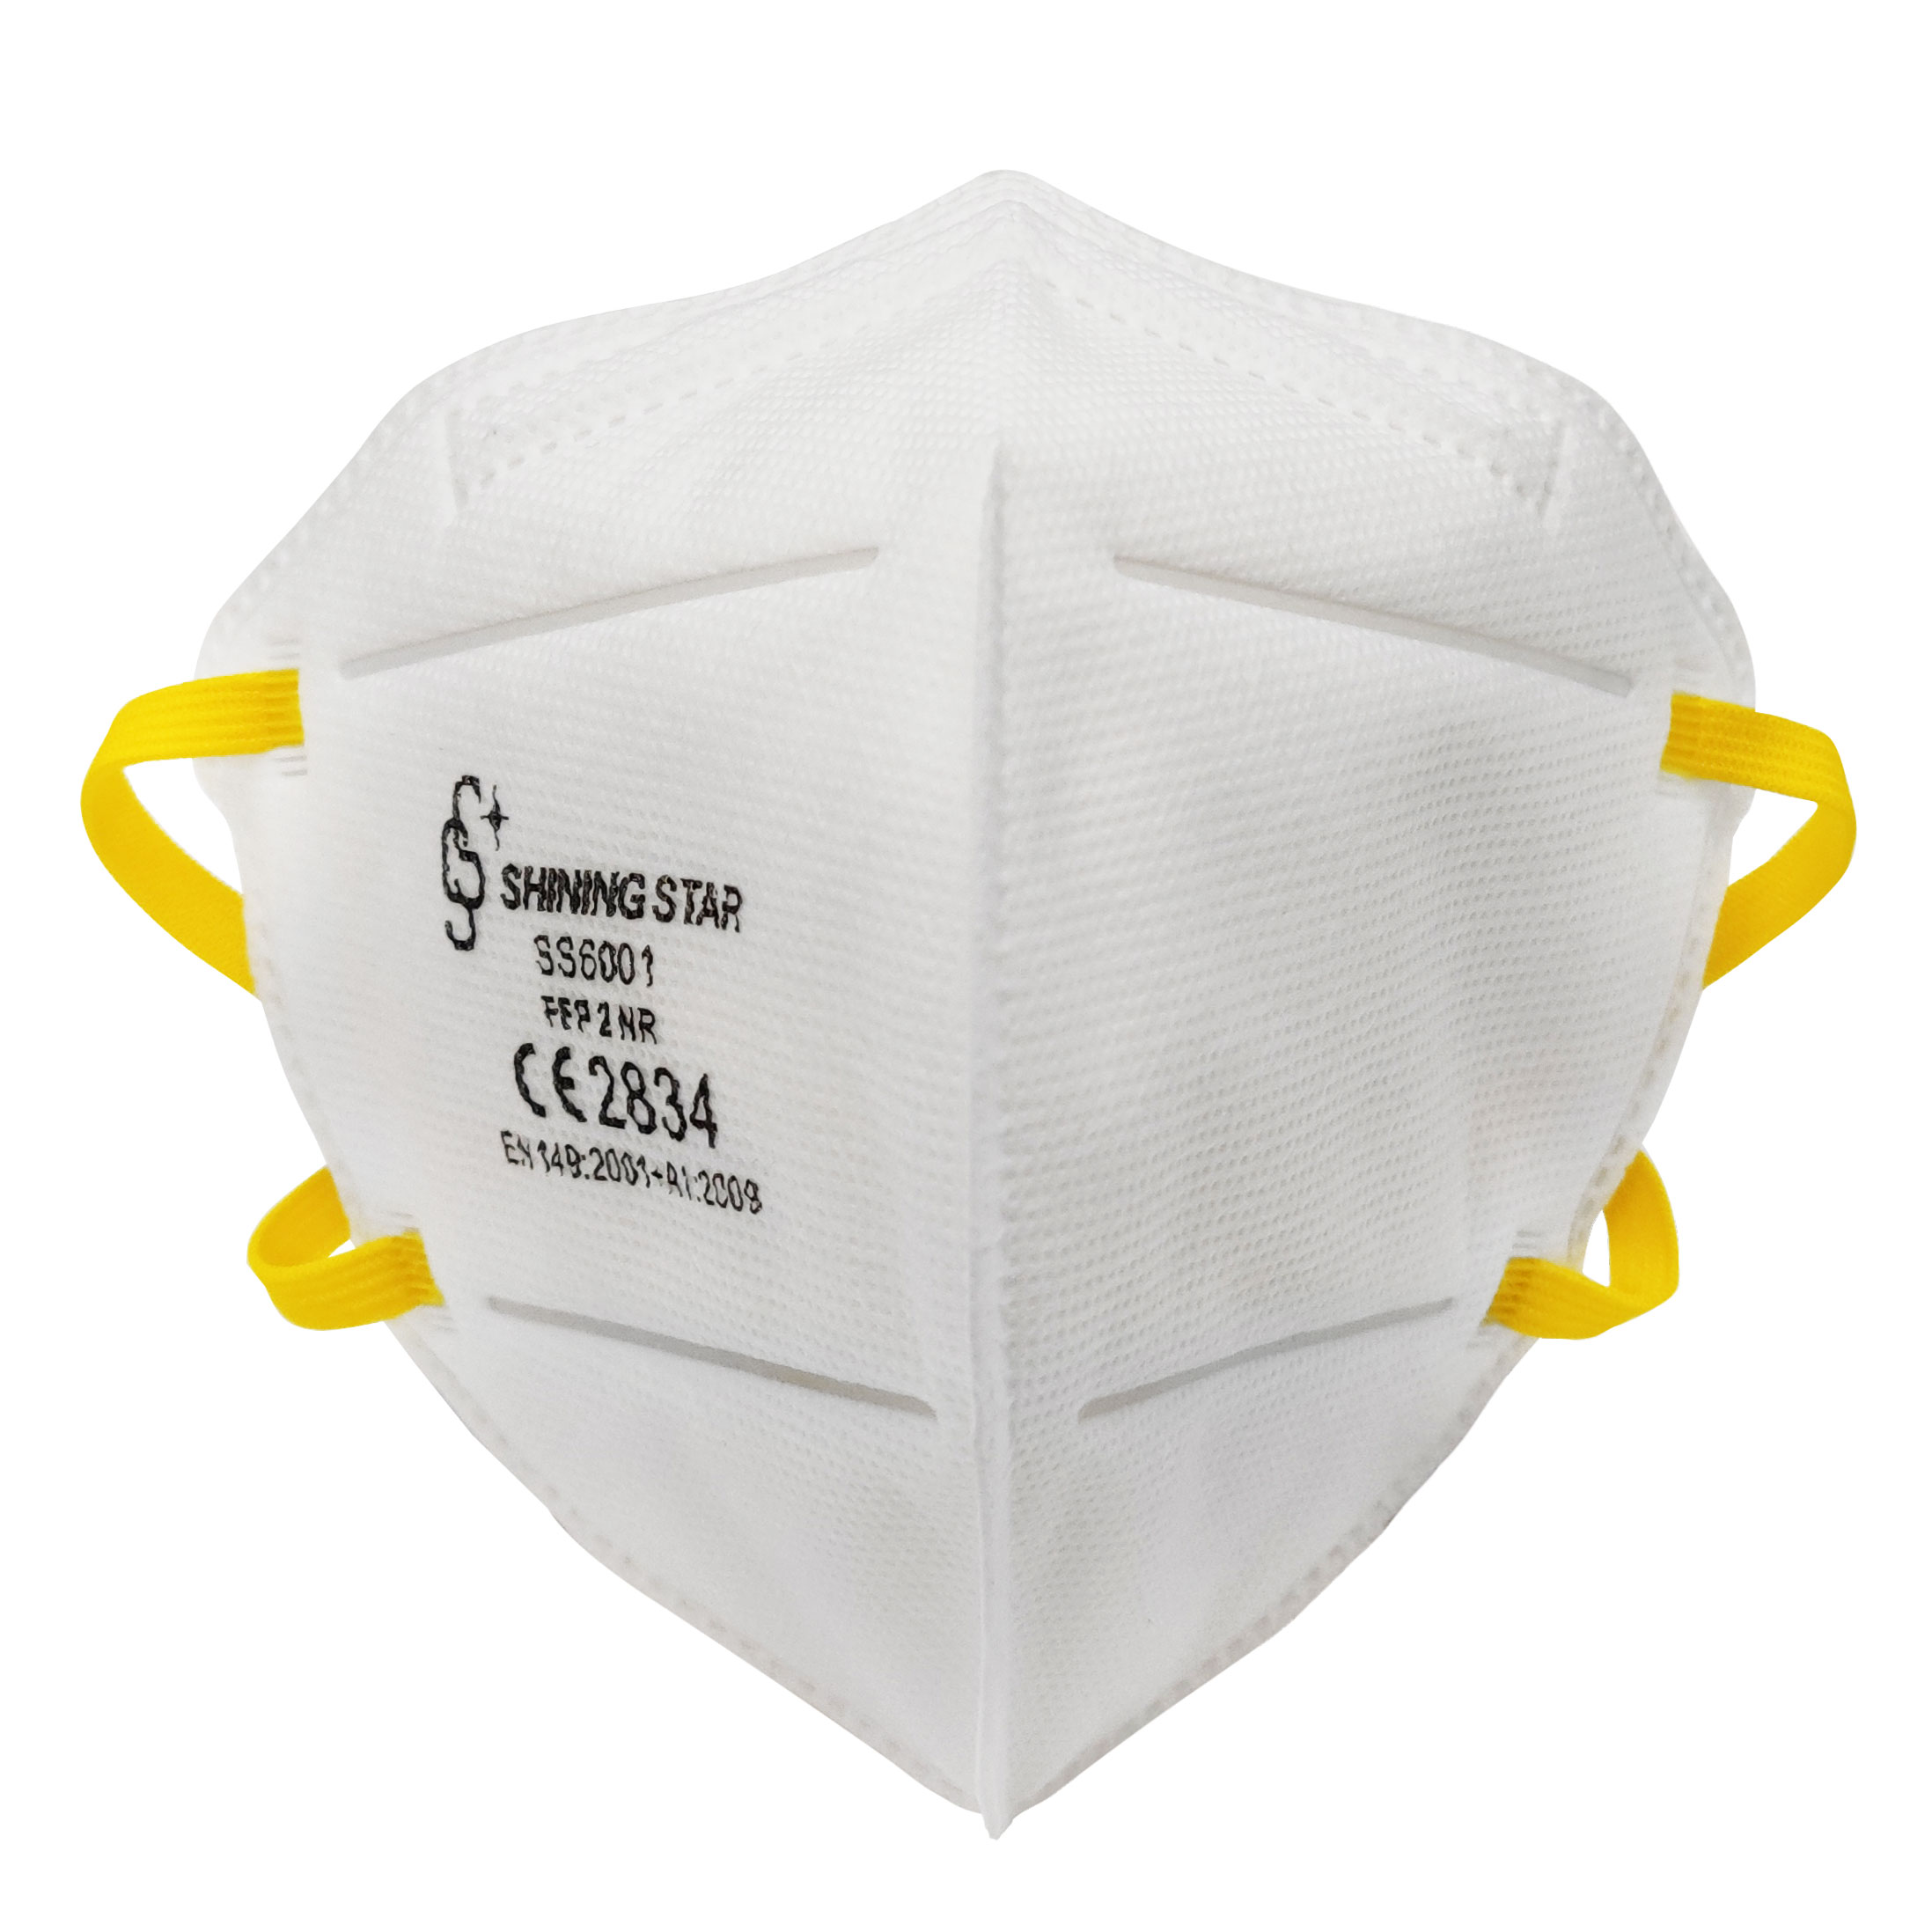 SS6001-FFP2 Disposable Particulate Respirator Featured Image